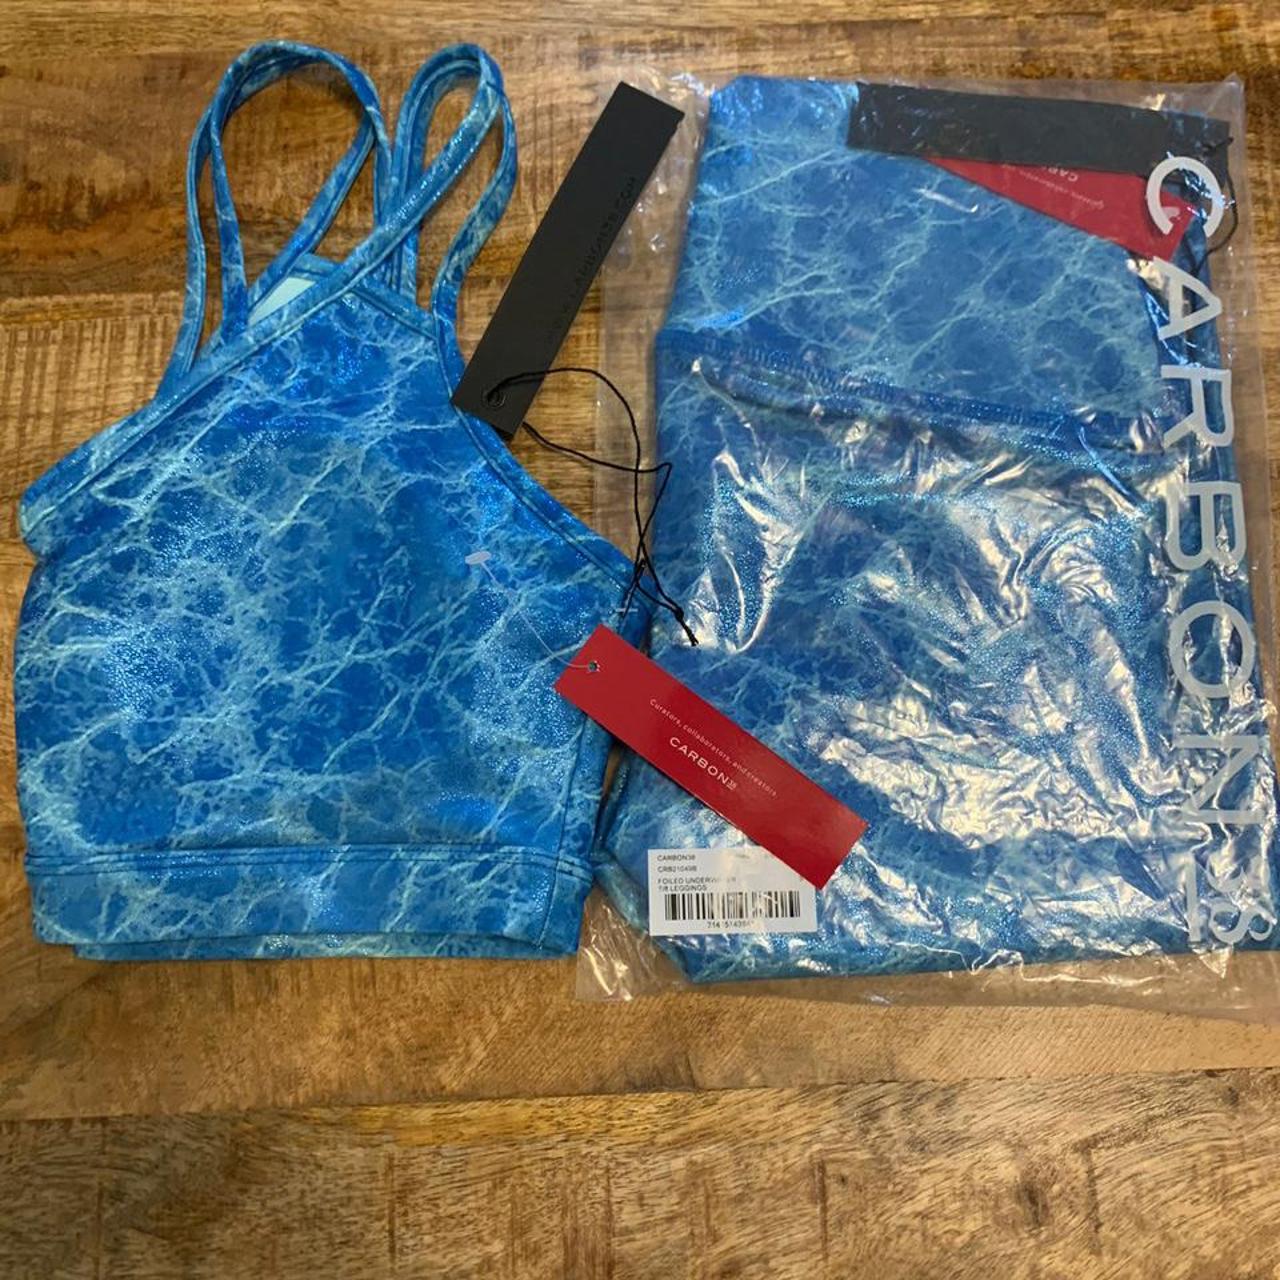 CARBON 38 Foiled Underwater Blue 7/8 Leggings Sold Out Limited